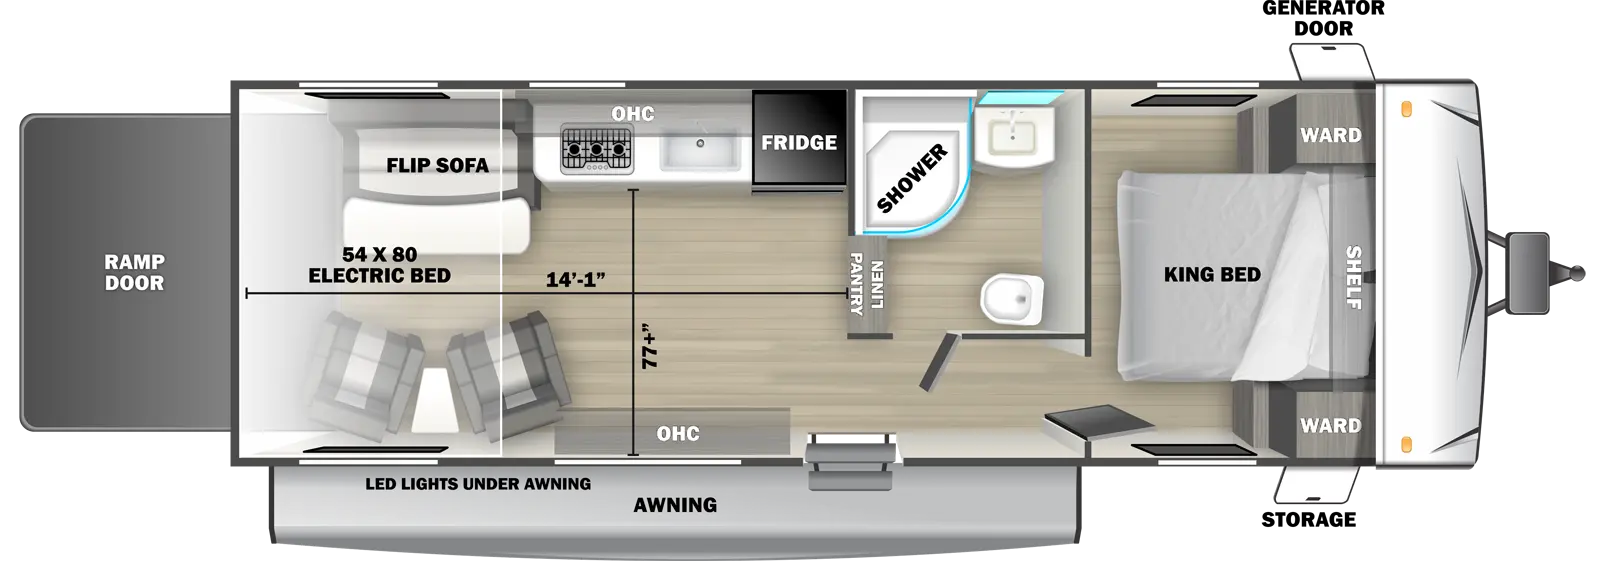 The 2530SRE travel trailer has no slide outs, 1 entry door and 1 rear ramp door. Exterior features include an awning with LED lights, front door side storage and front off-door side generator door. Interior layout from front to back includes: front bedroom with foot-facing King bed, shelf over the bed, and front corner wardrobes; off-door side bathroom with shower, linen storage, toilet and single sink vanity; off-door side kitchen with stovetop, overhead cabinet, sink and refrigerator; door side overhead cabinet; 54 x 80 electric bed sits over 2 recliners with end table and off-door side flip sofa. Cargo length from rear of unit to kitchen wall is 14 ft. 1 in. Cargo width from kitchen countertop to door side wall is 77 inches.